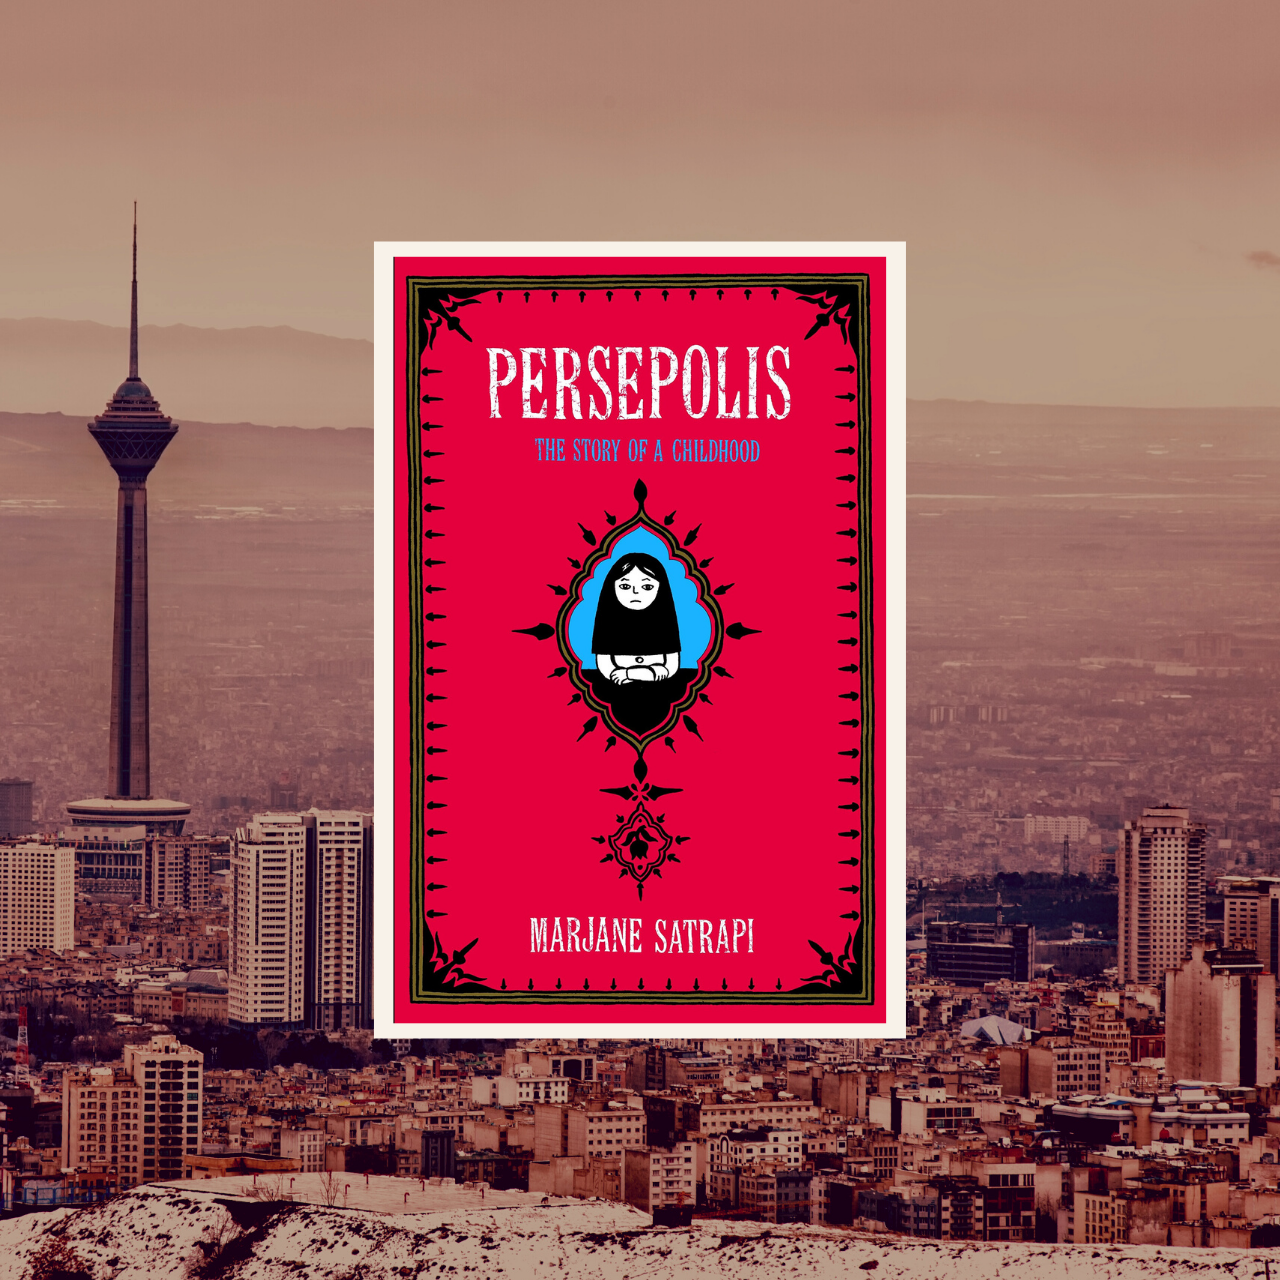 The cover of the book set against the skyline of Tehran